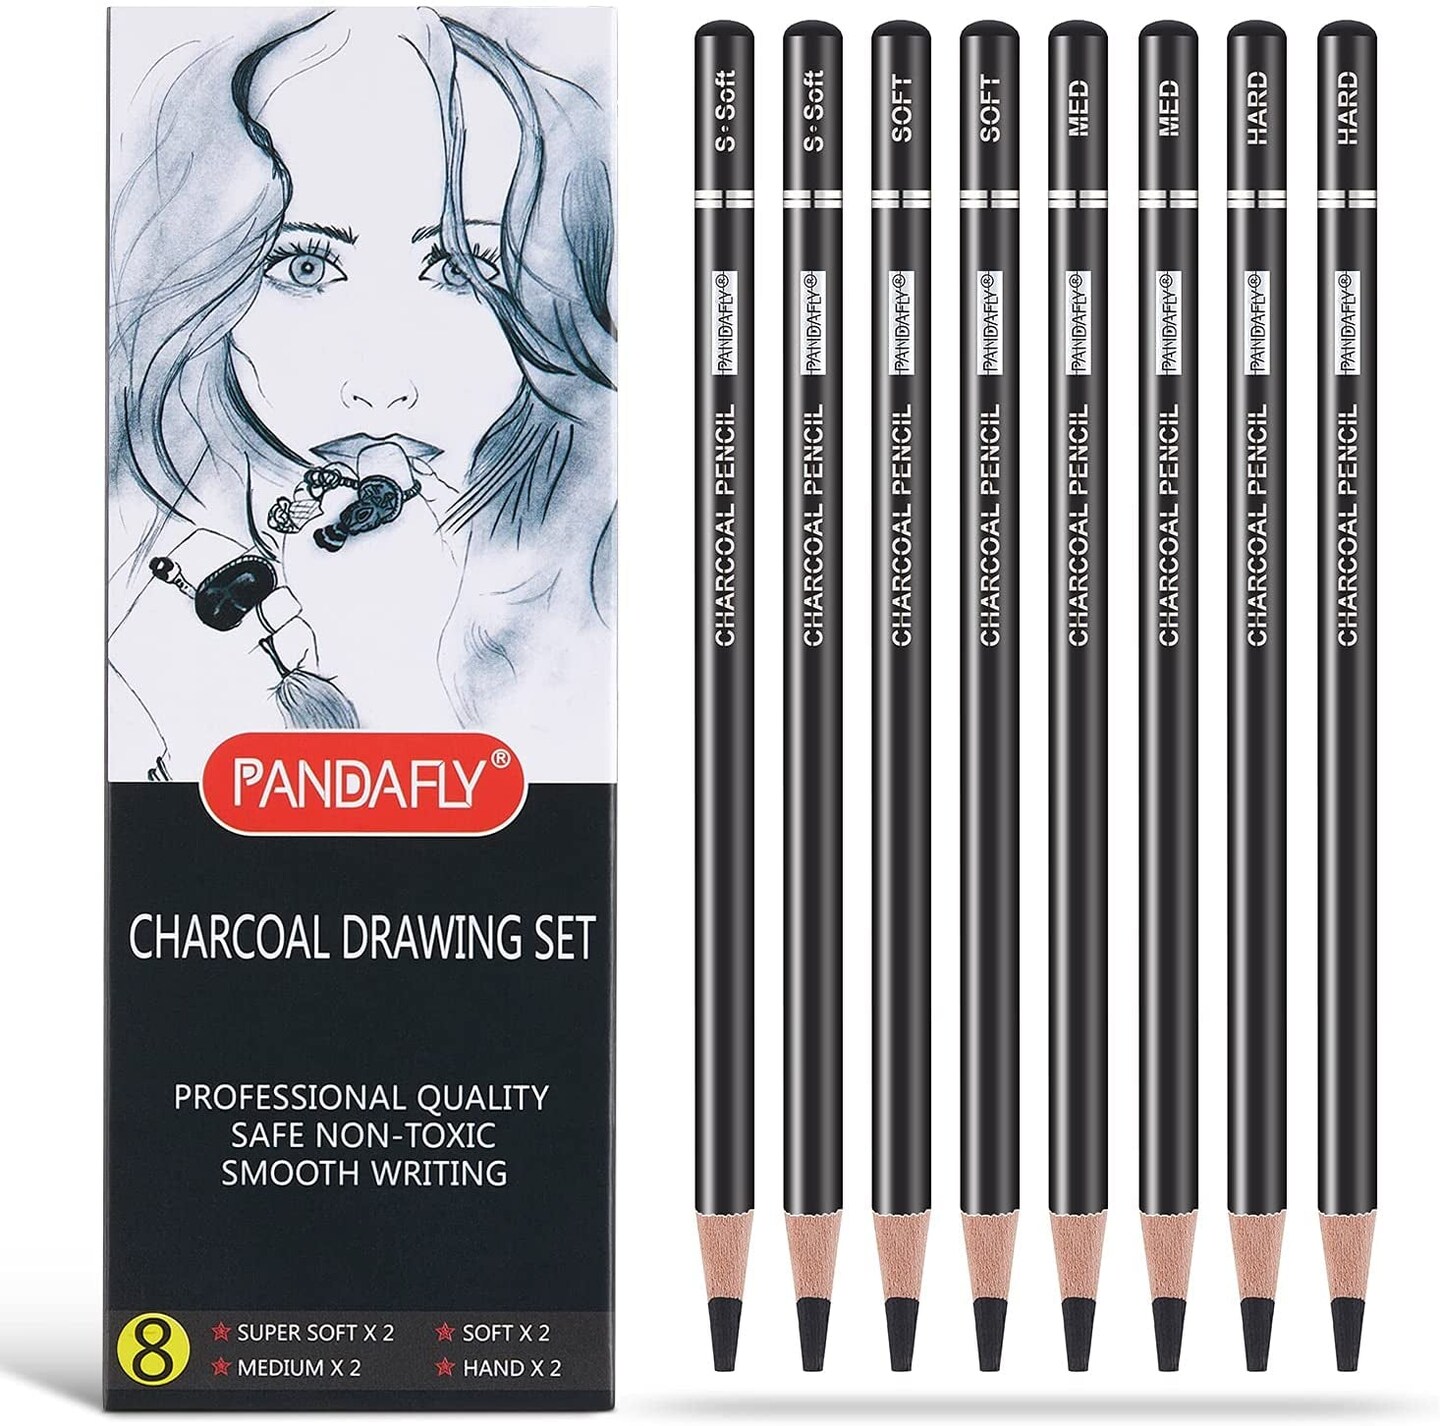 PANDAFLY White Charcoal Pencils Drawing Set, Professional 5 Pieces Sketch  Highlight White Pencils for Drawing, Sketching, Shading, Blending, White